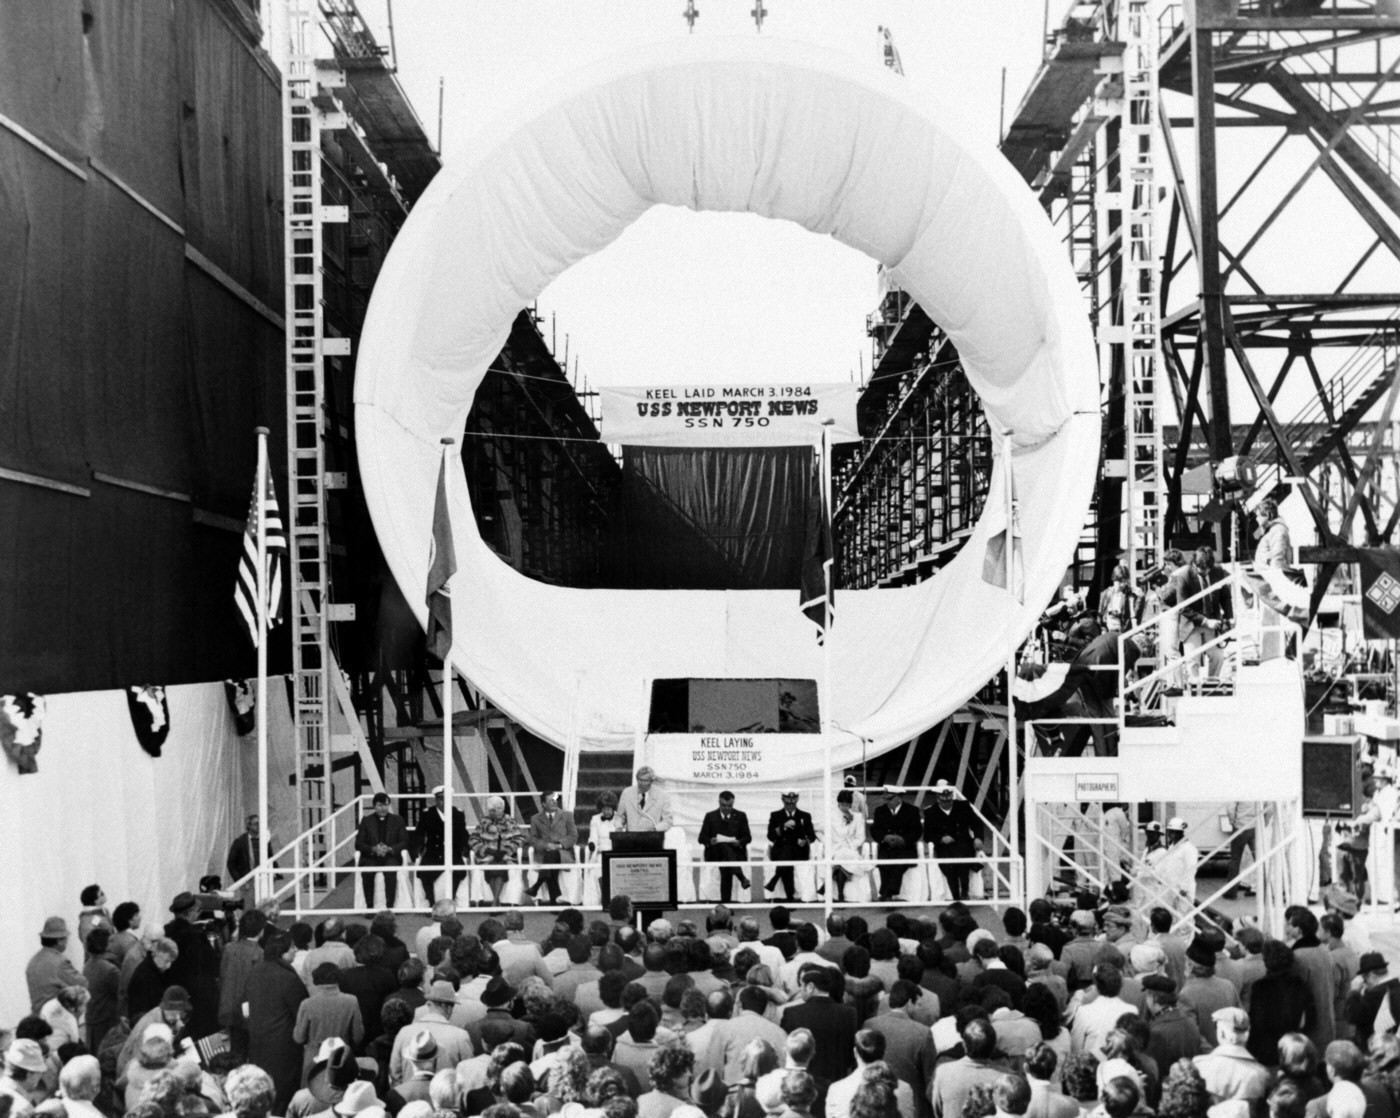 ssn-750 uss newport news keel laying ceremony march 1984